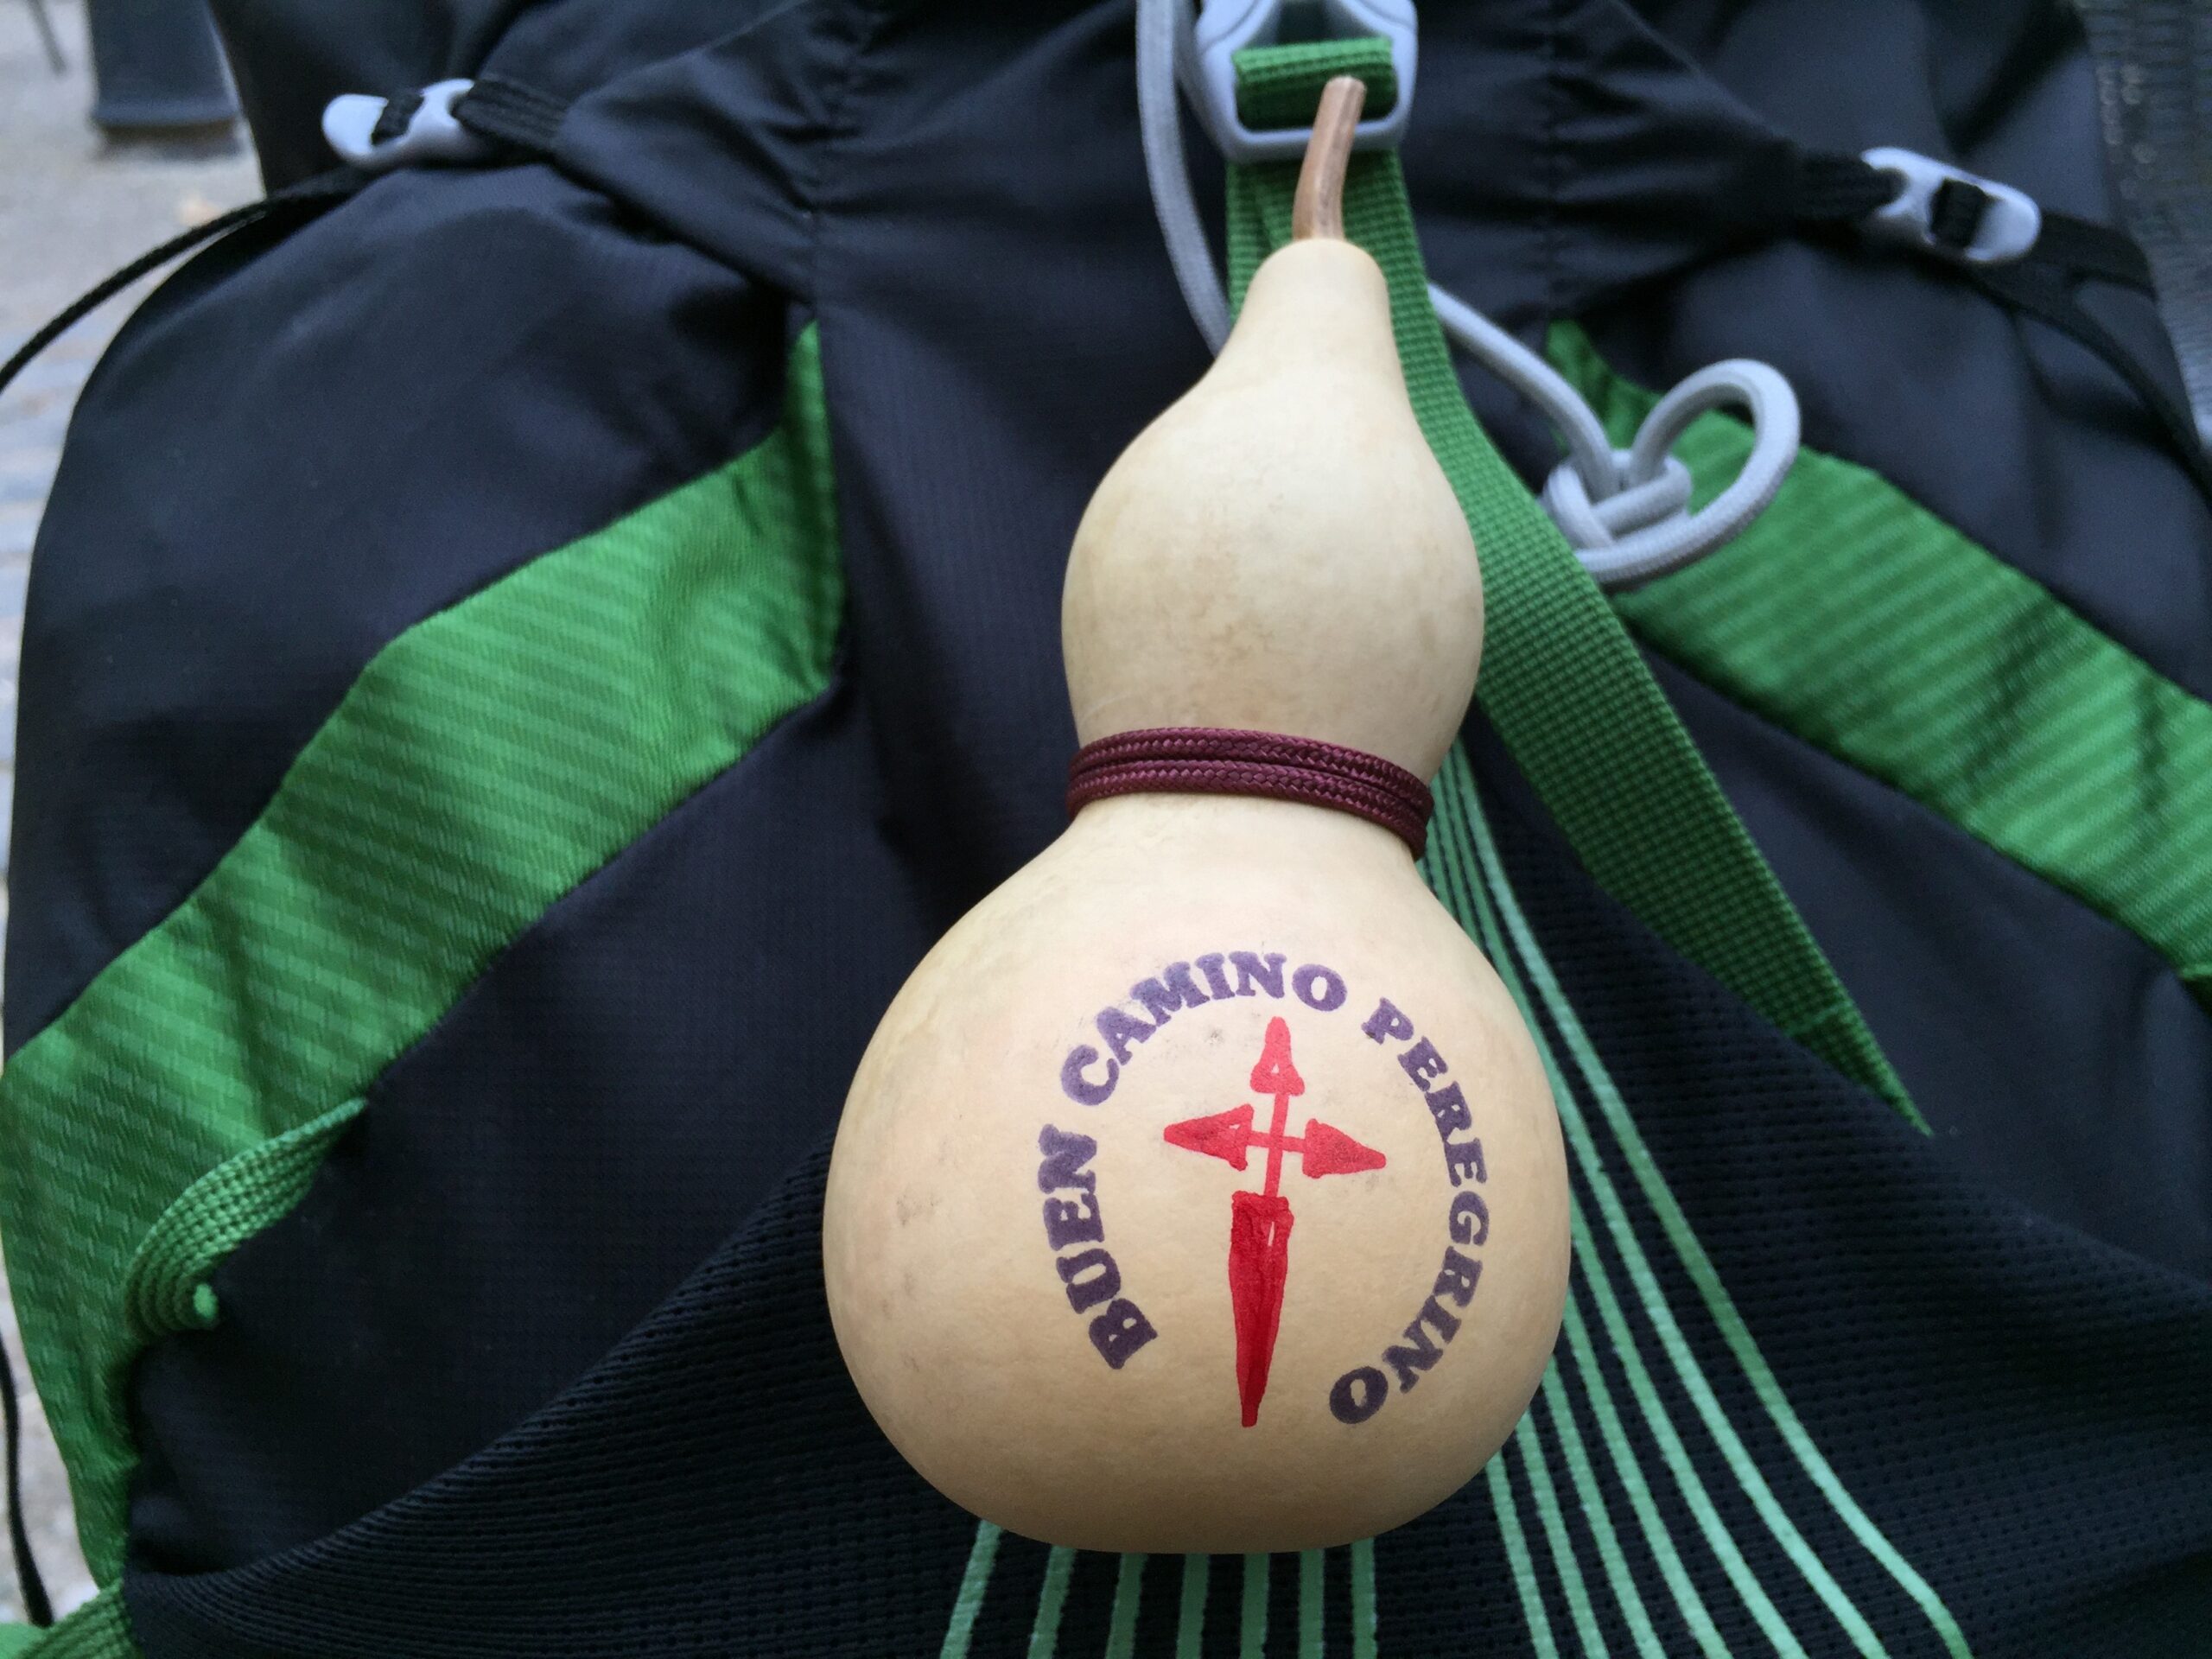 A gourd, representing those that medieval pilgrims used to carry water, sits strapped to my backpack after I received it as a gift from the owner of the sports store Planeta Agua in Logro&ntilde;o, Spain.